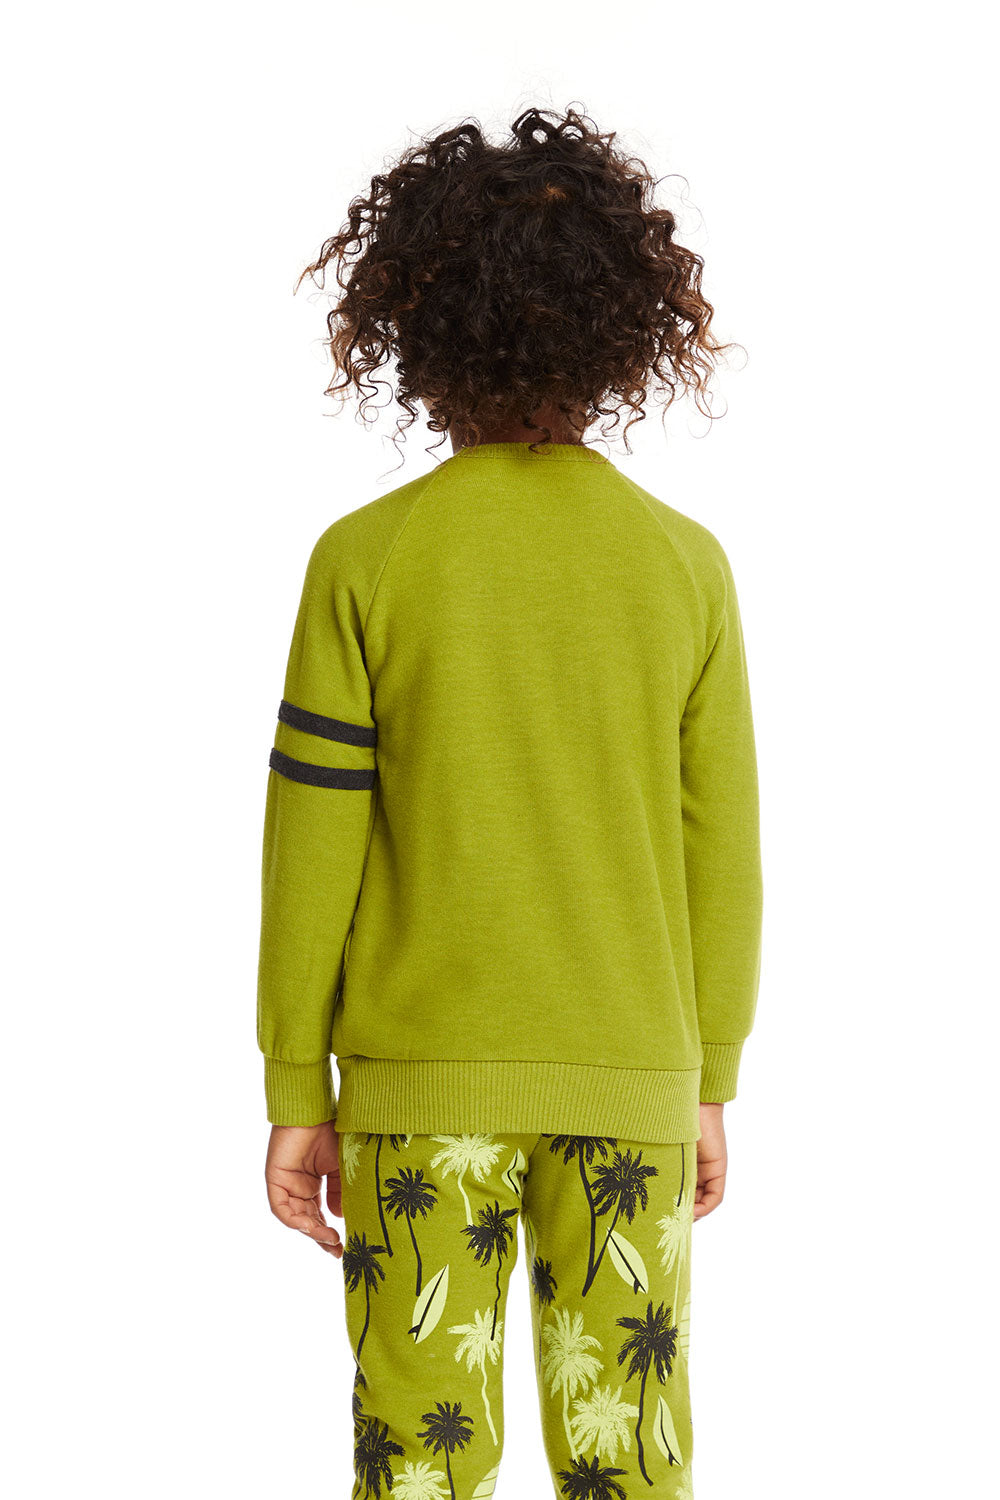 California Palm Trees Pullover BOYS chaserbrand